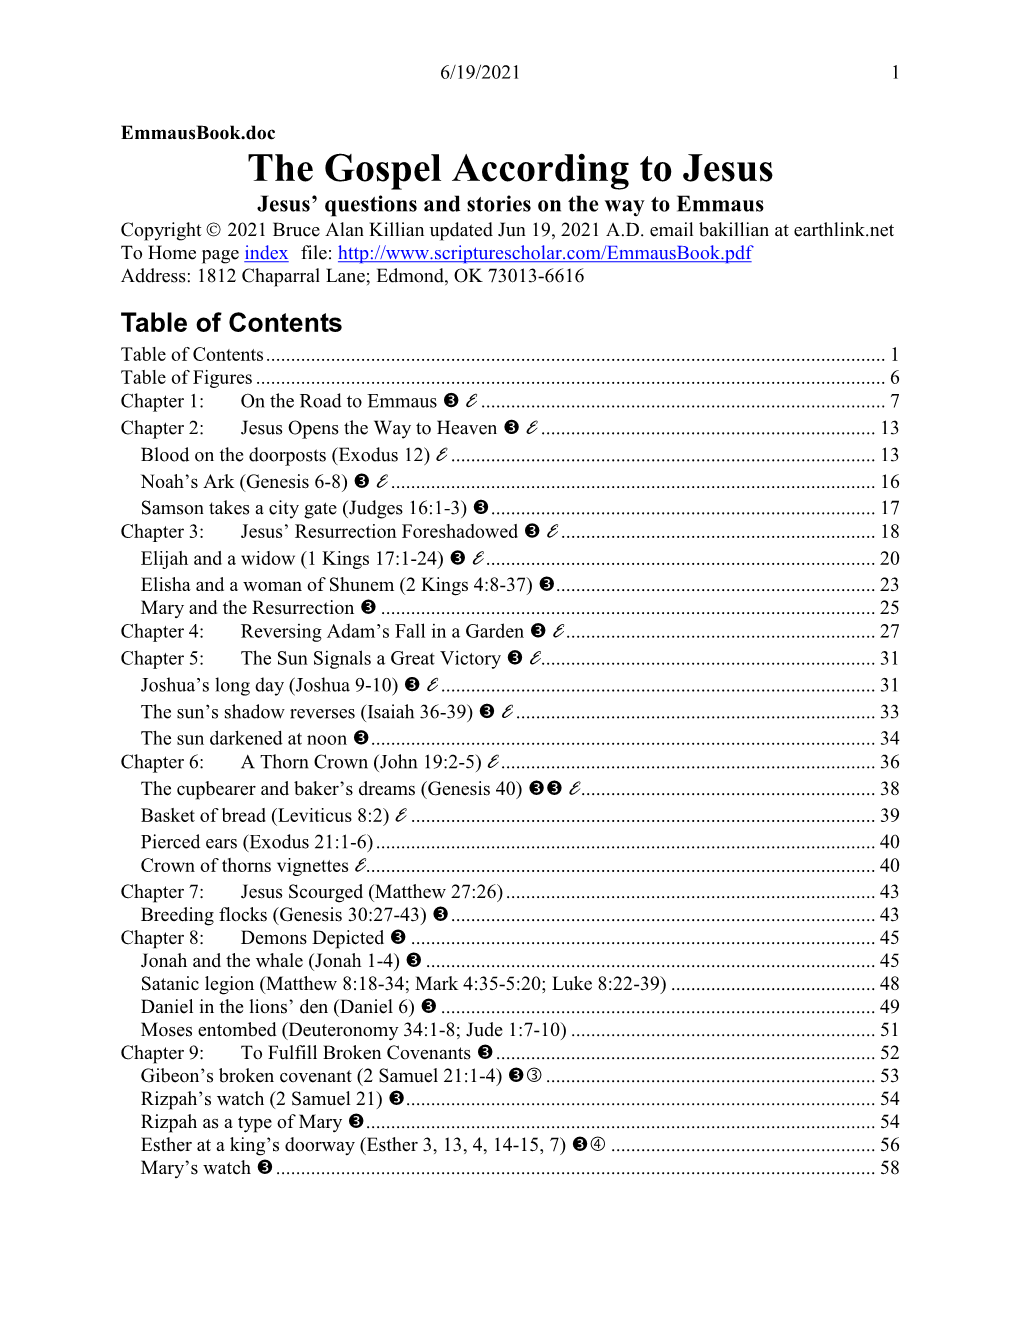 The Gospel According to Jesus: Jesus' Questions and Stories on the Way to Emmaus